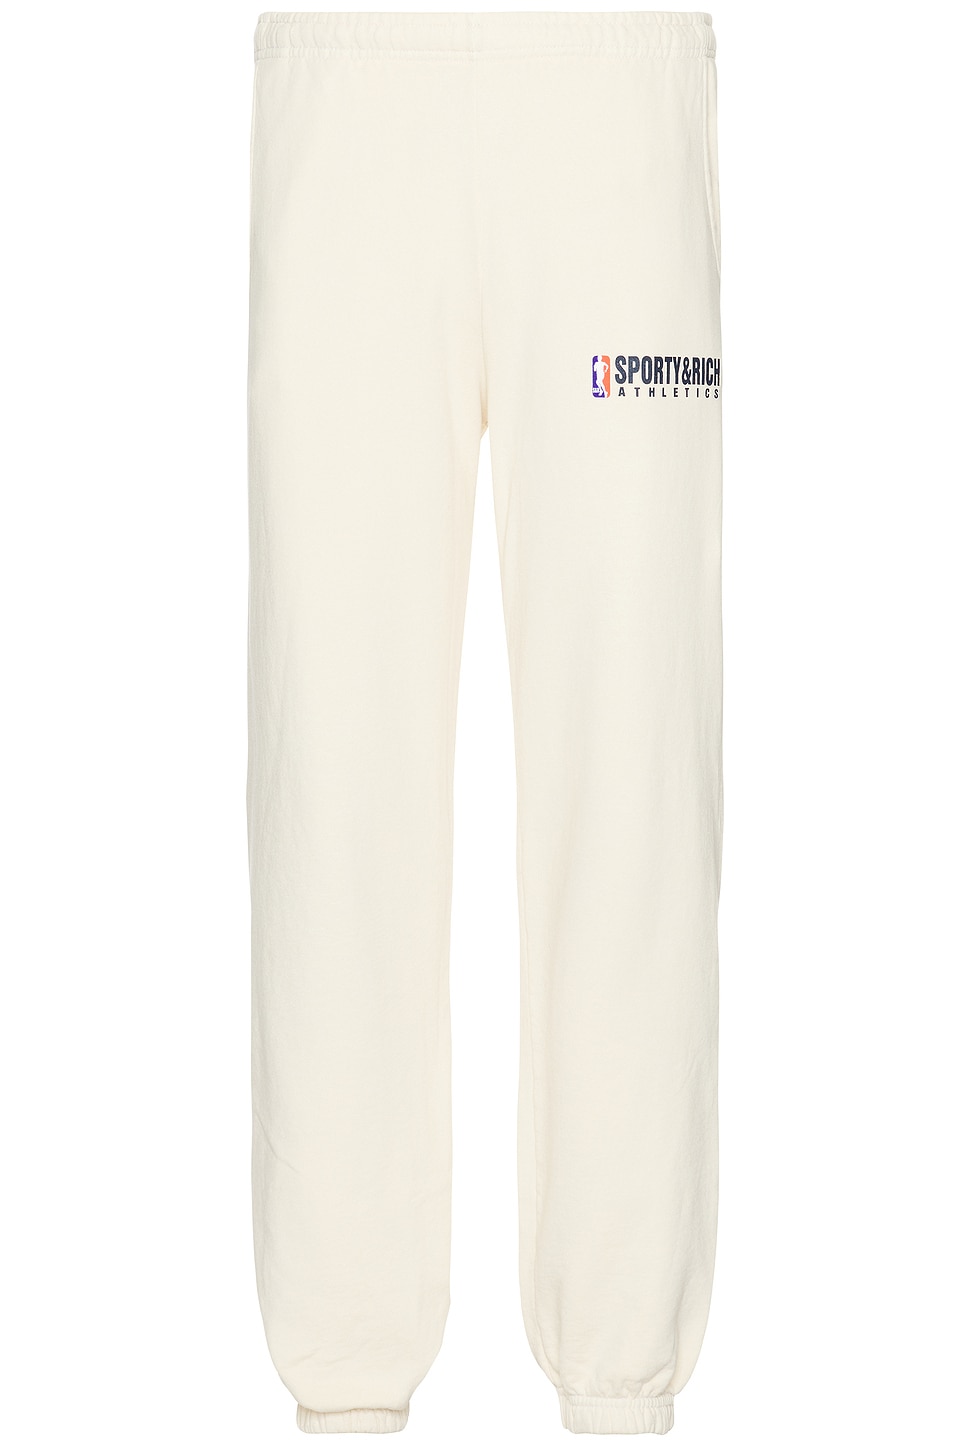 Image 1 of Sporty & Rich Team Logo Sweatpants in Cream